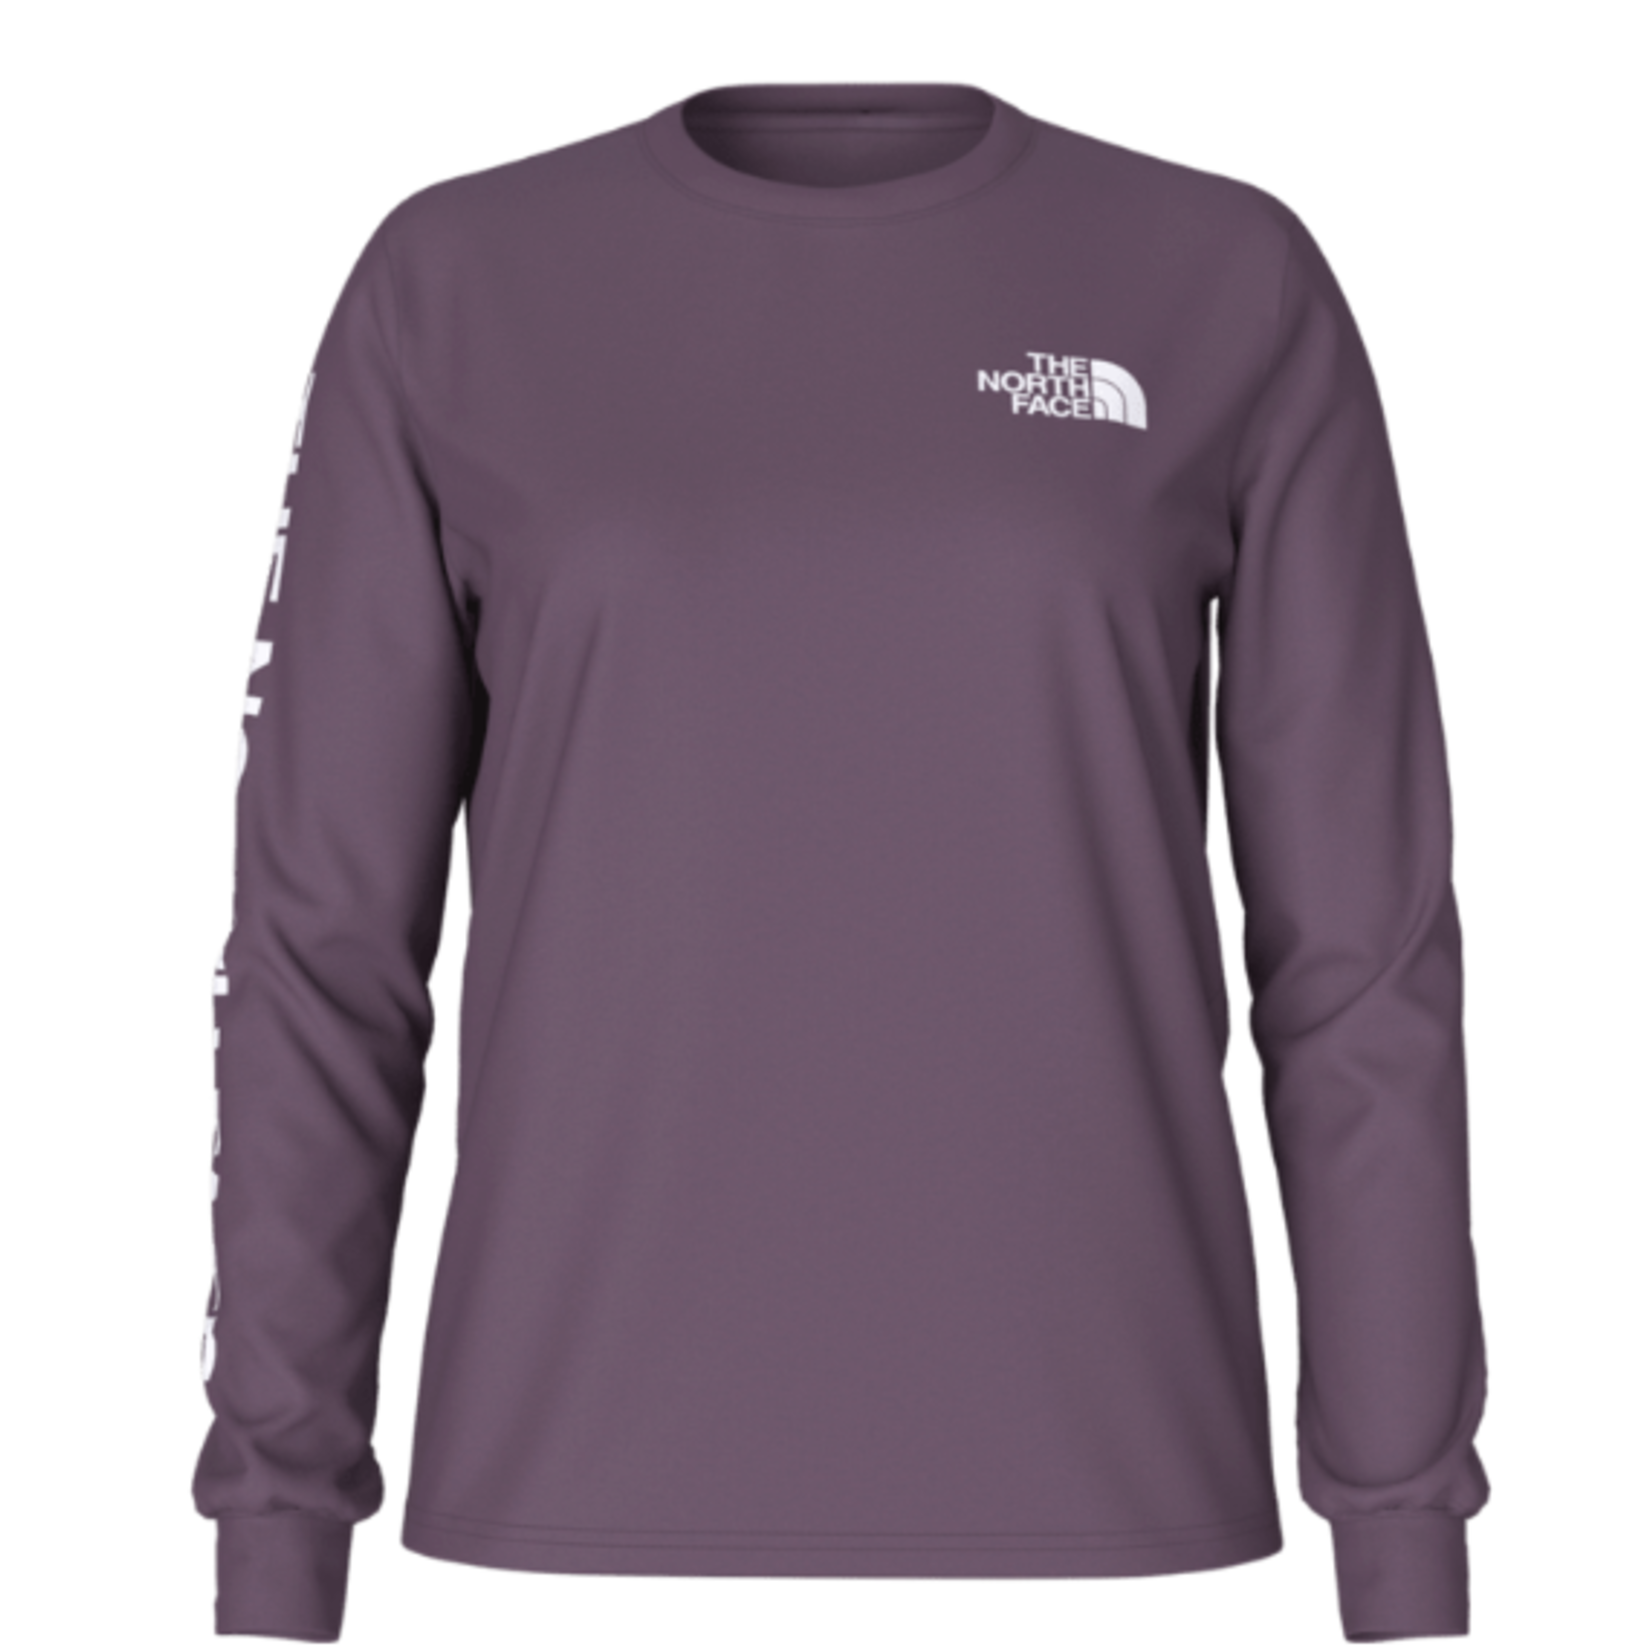 The North Face The North Face Long Sleeve Shirt, L/S Sleeve Hit Graphic Tee, Ladies